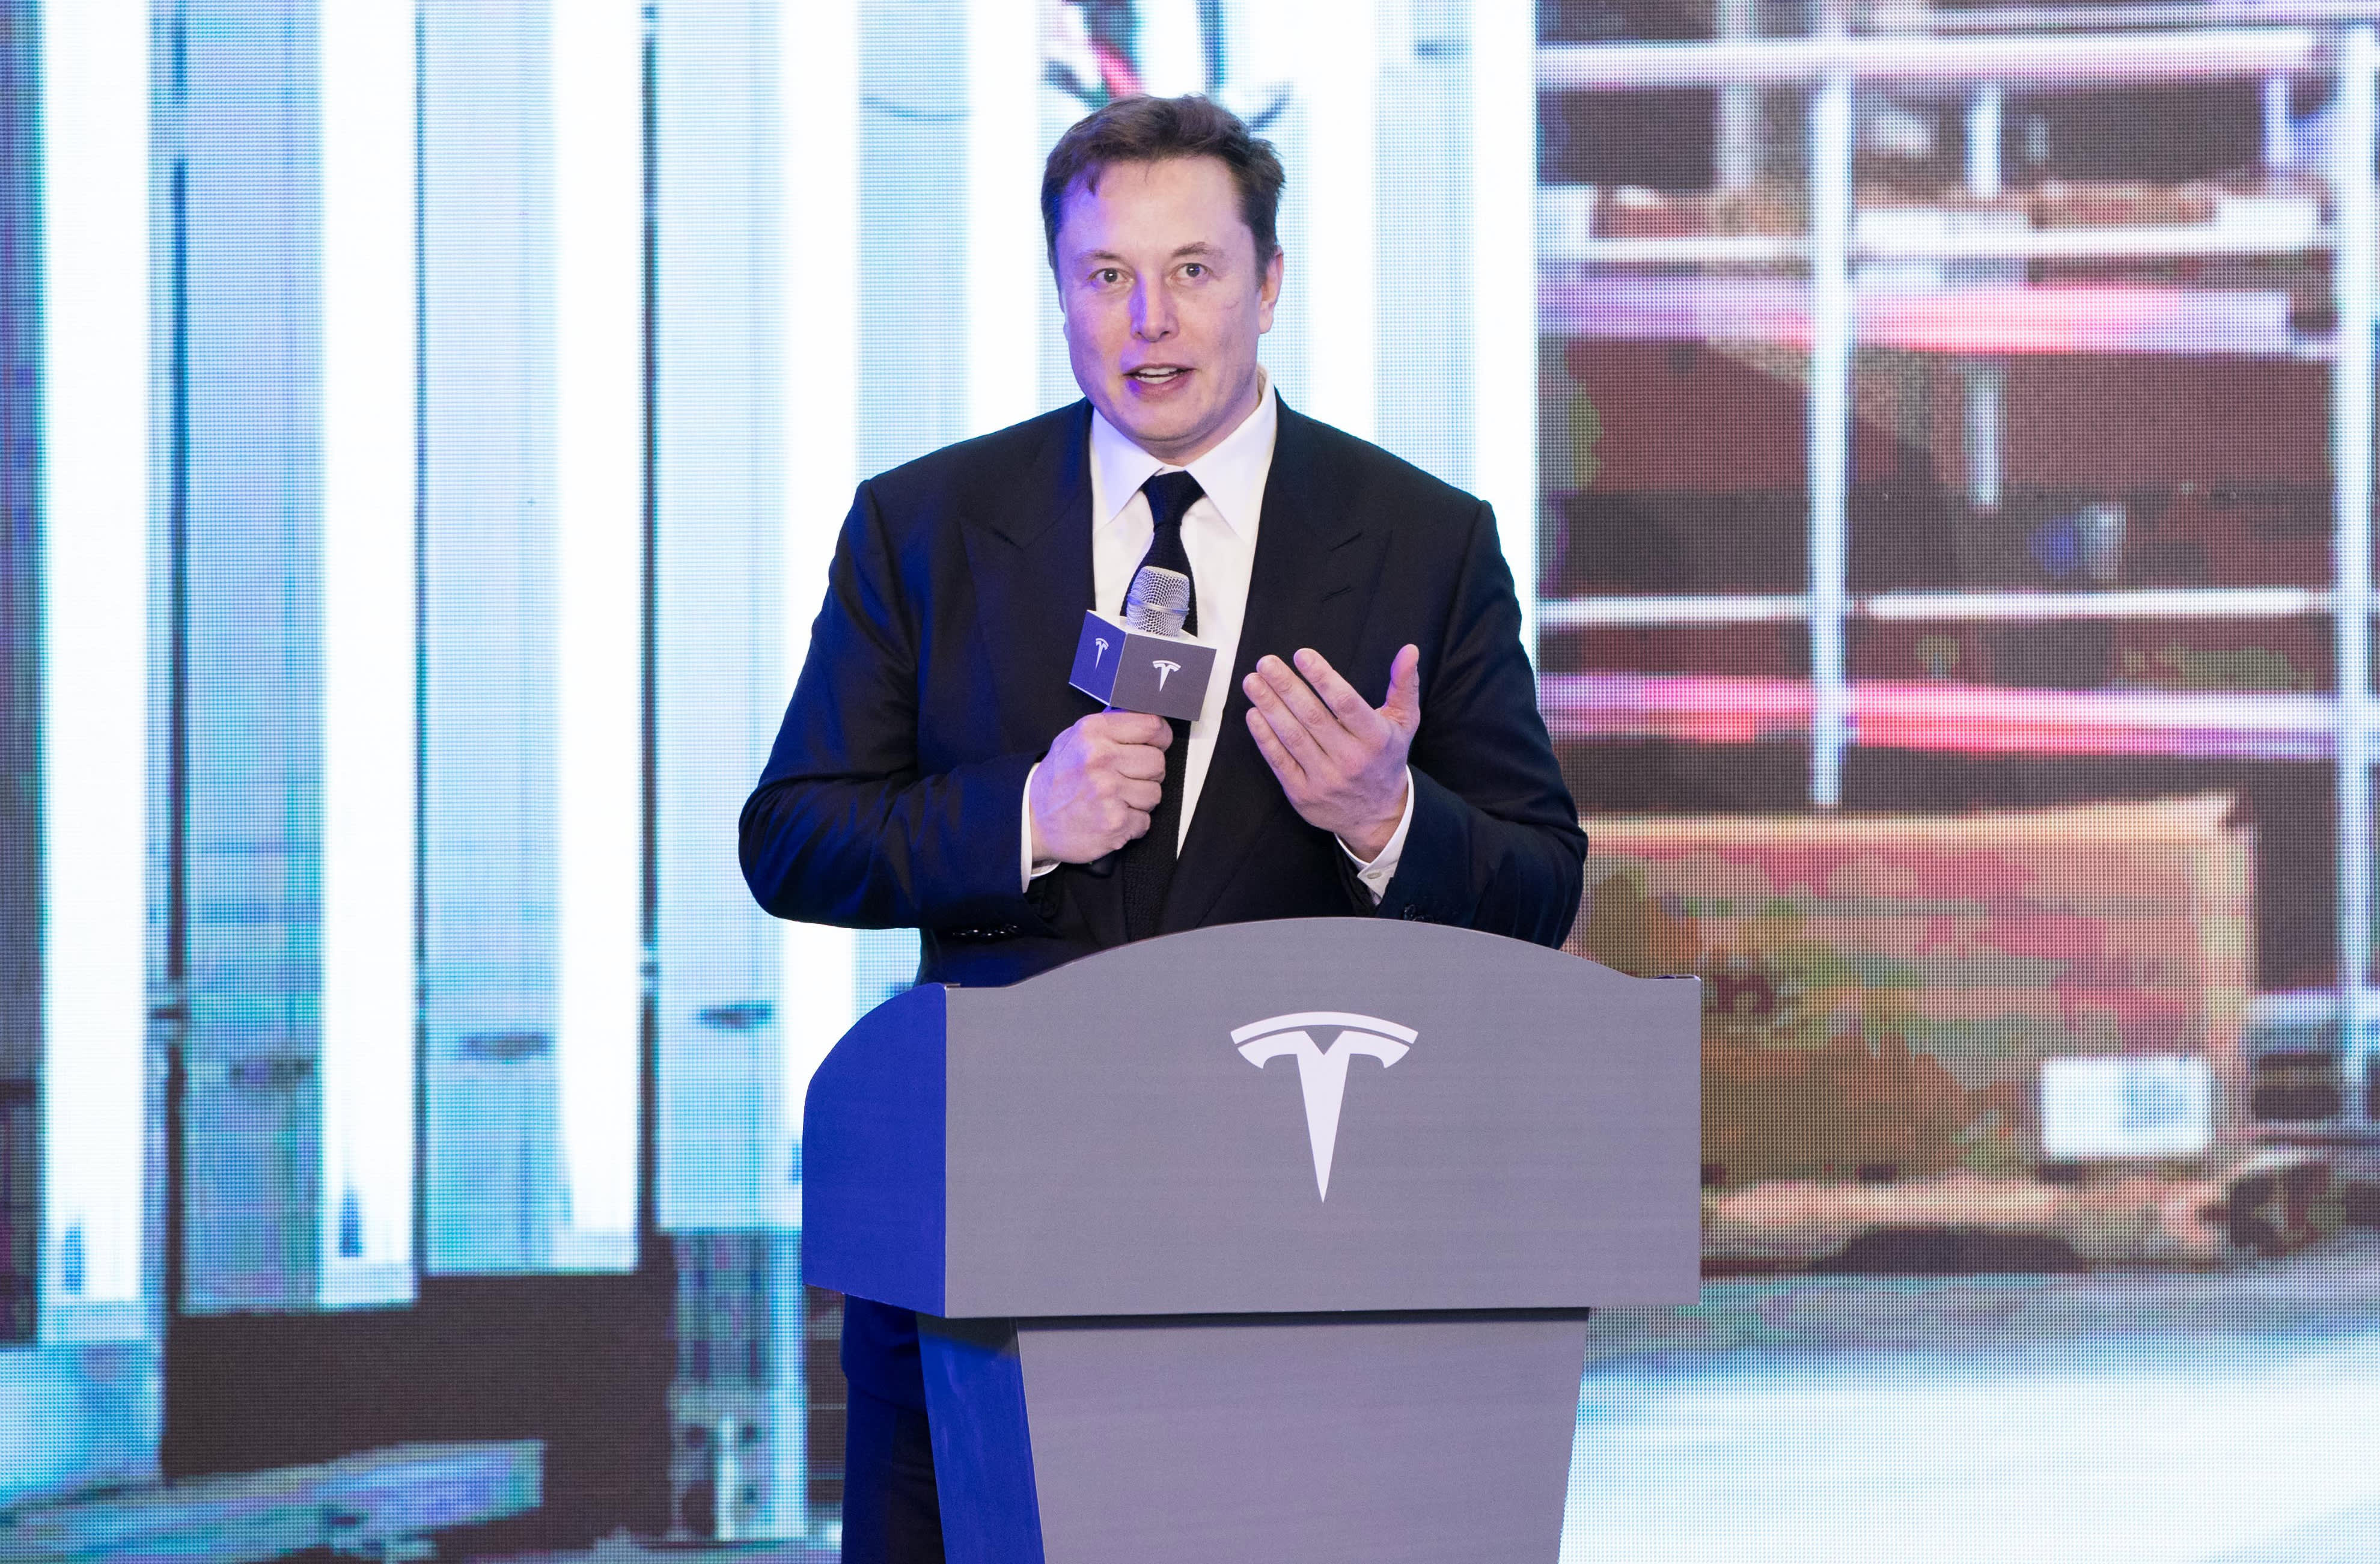 Tesla suffers its biggest fall since September 2020